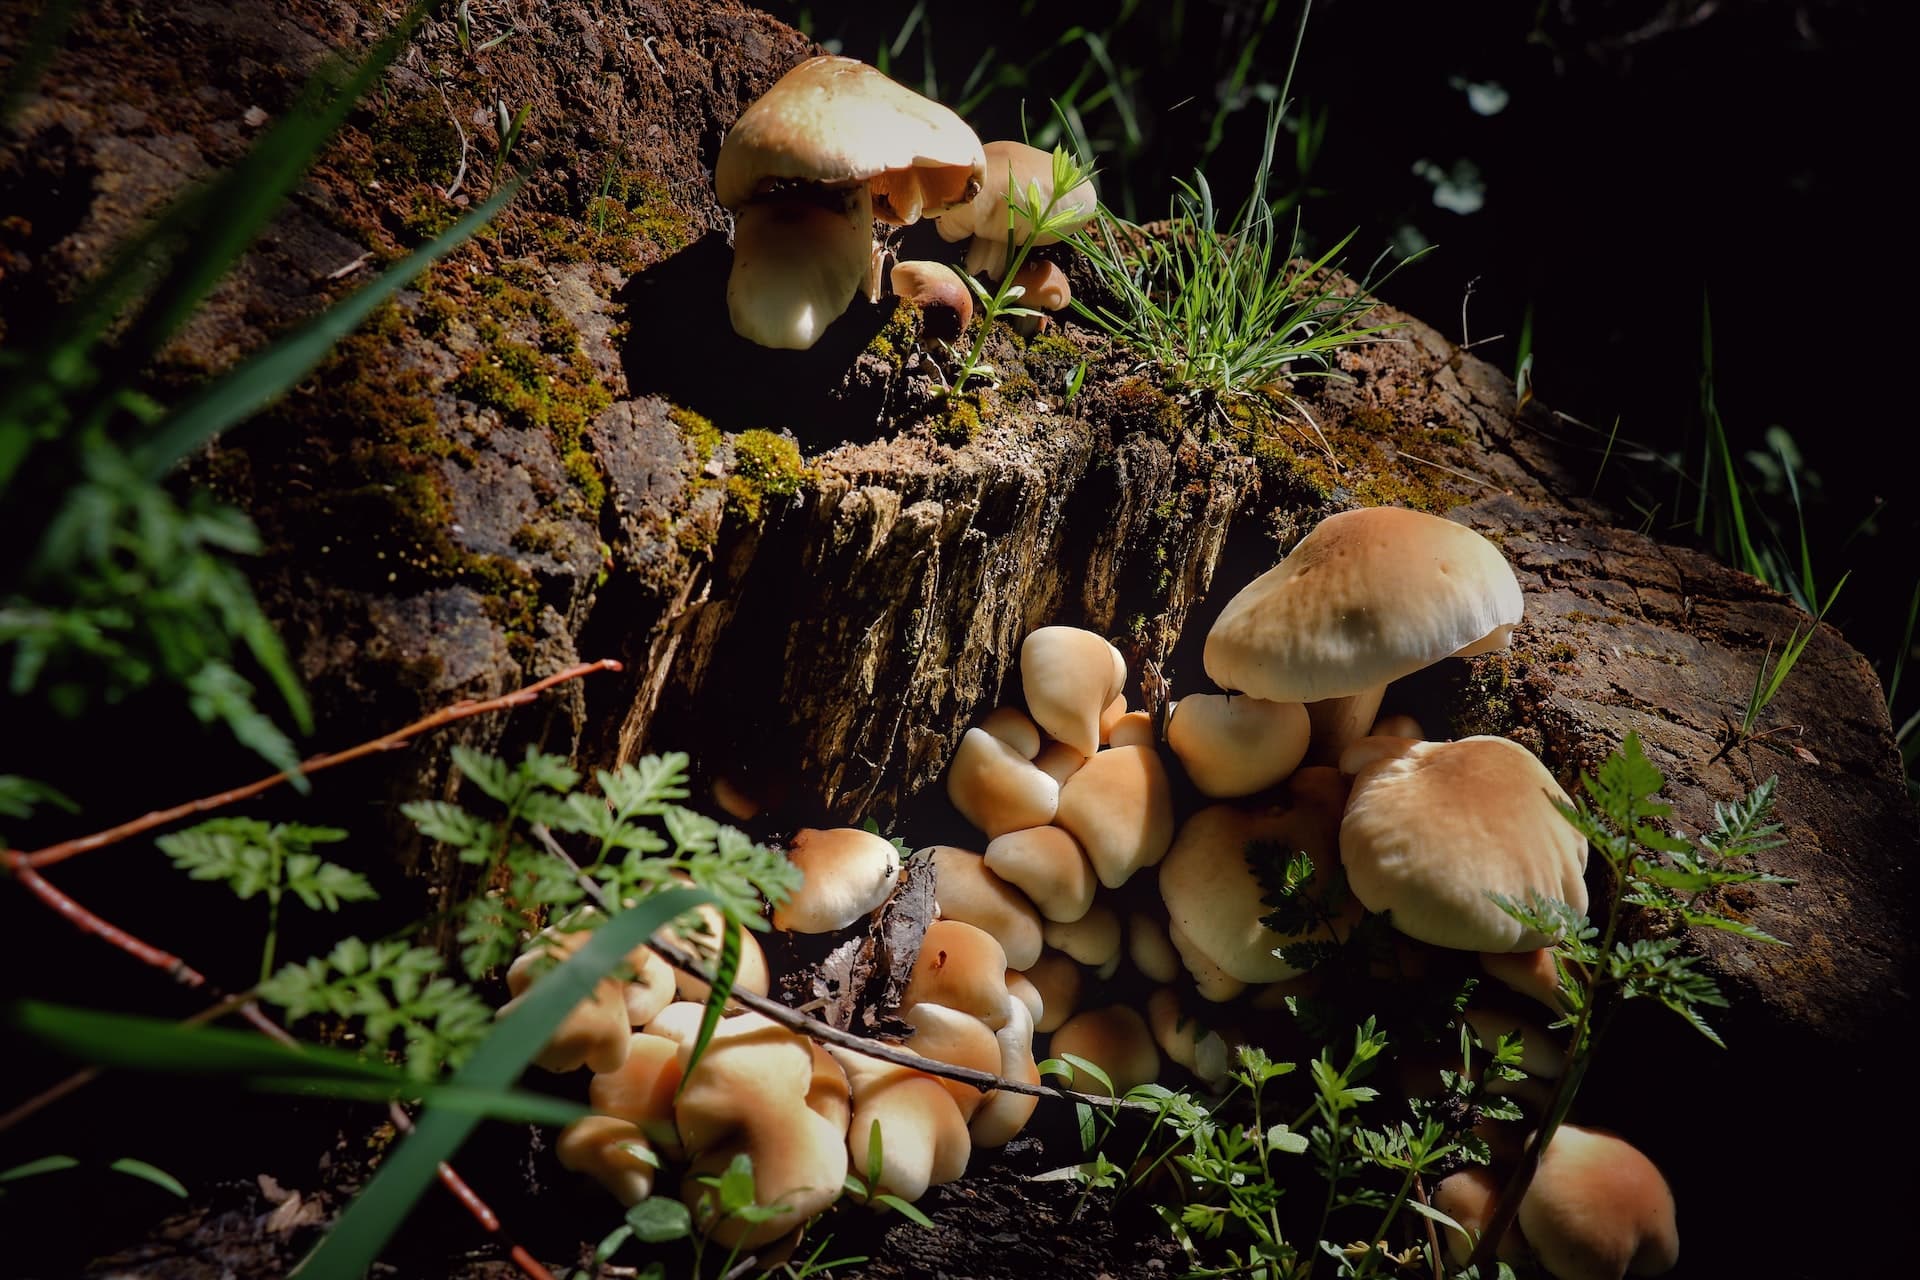 Mushrooms grow in a forest